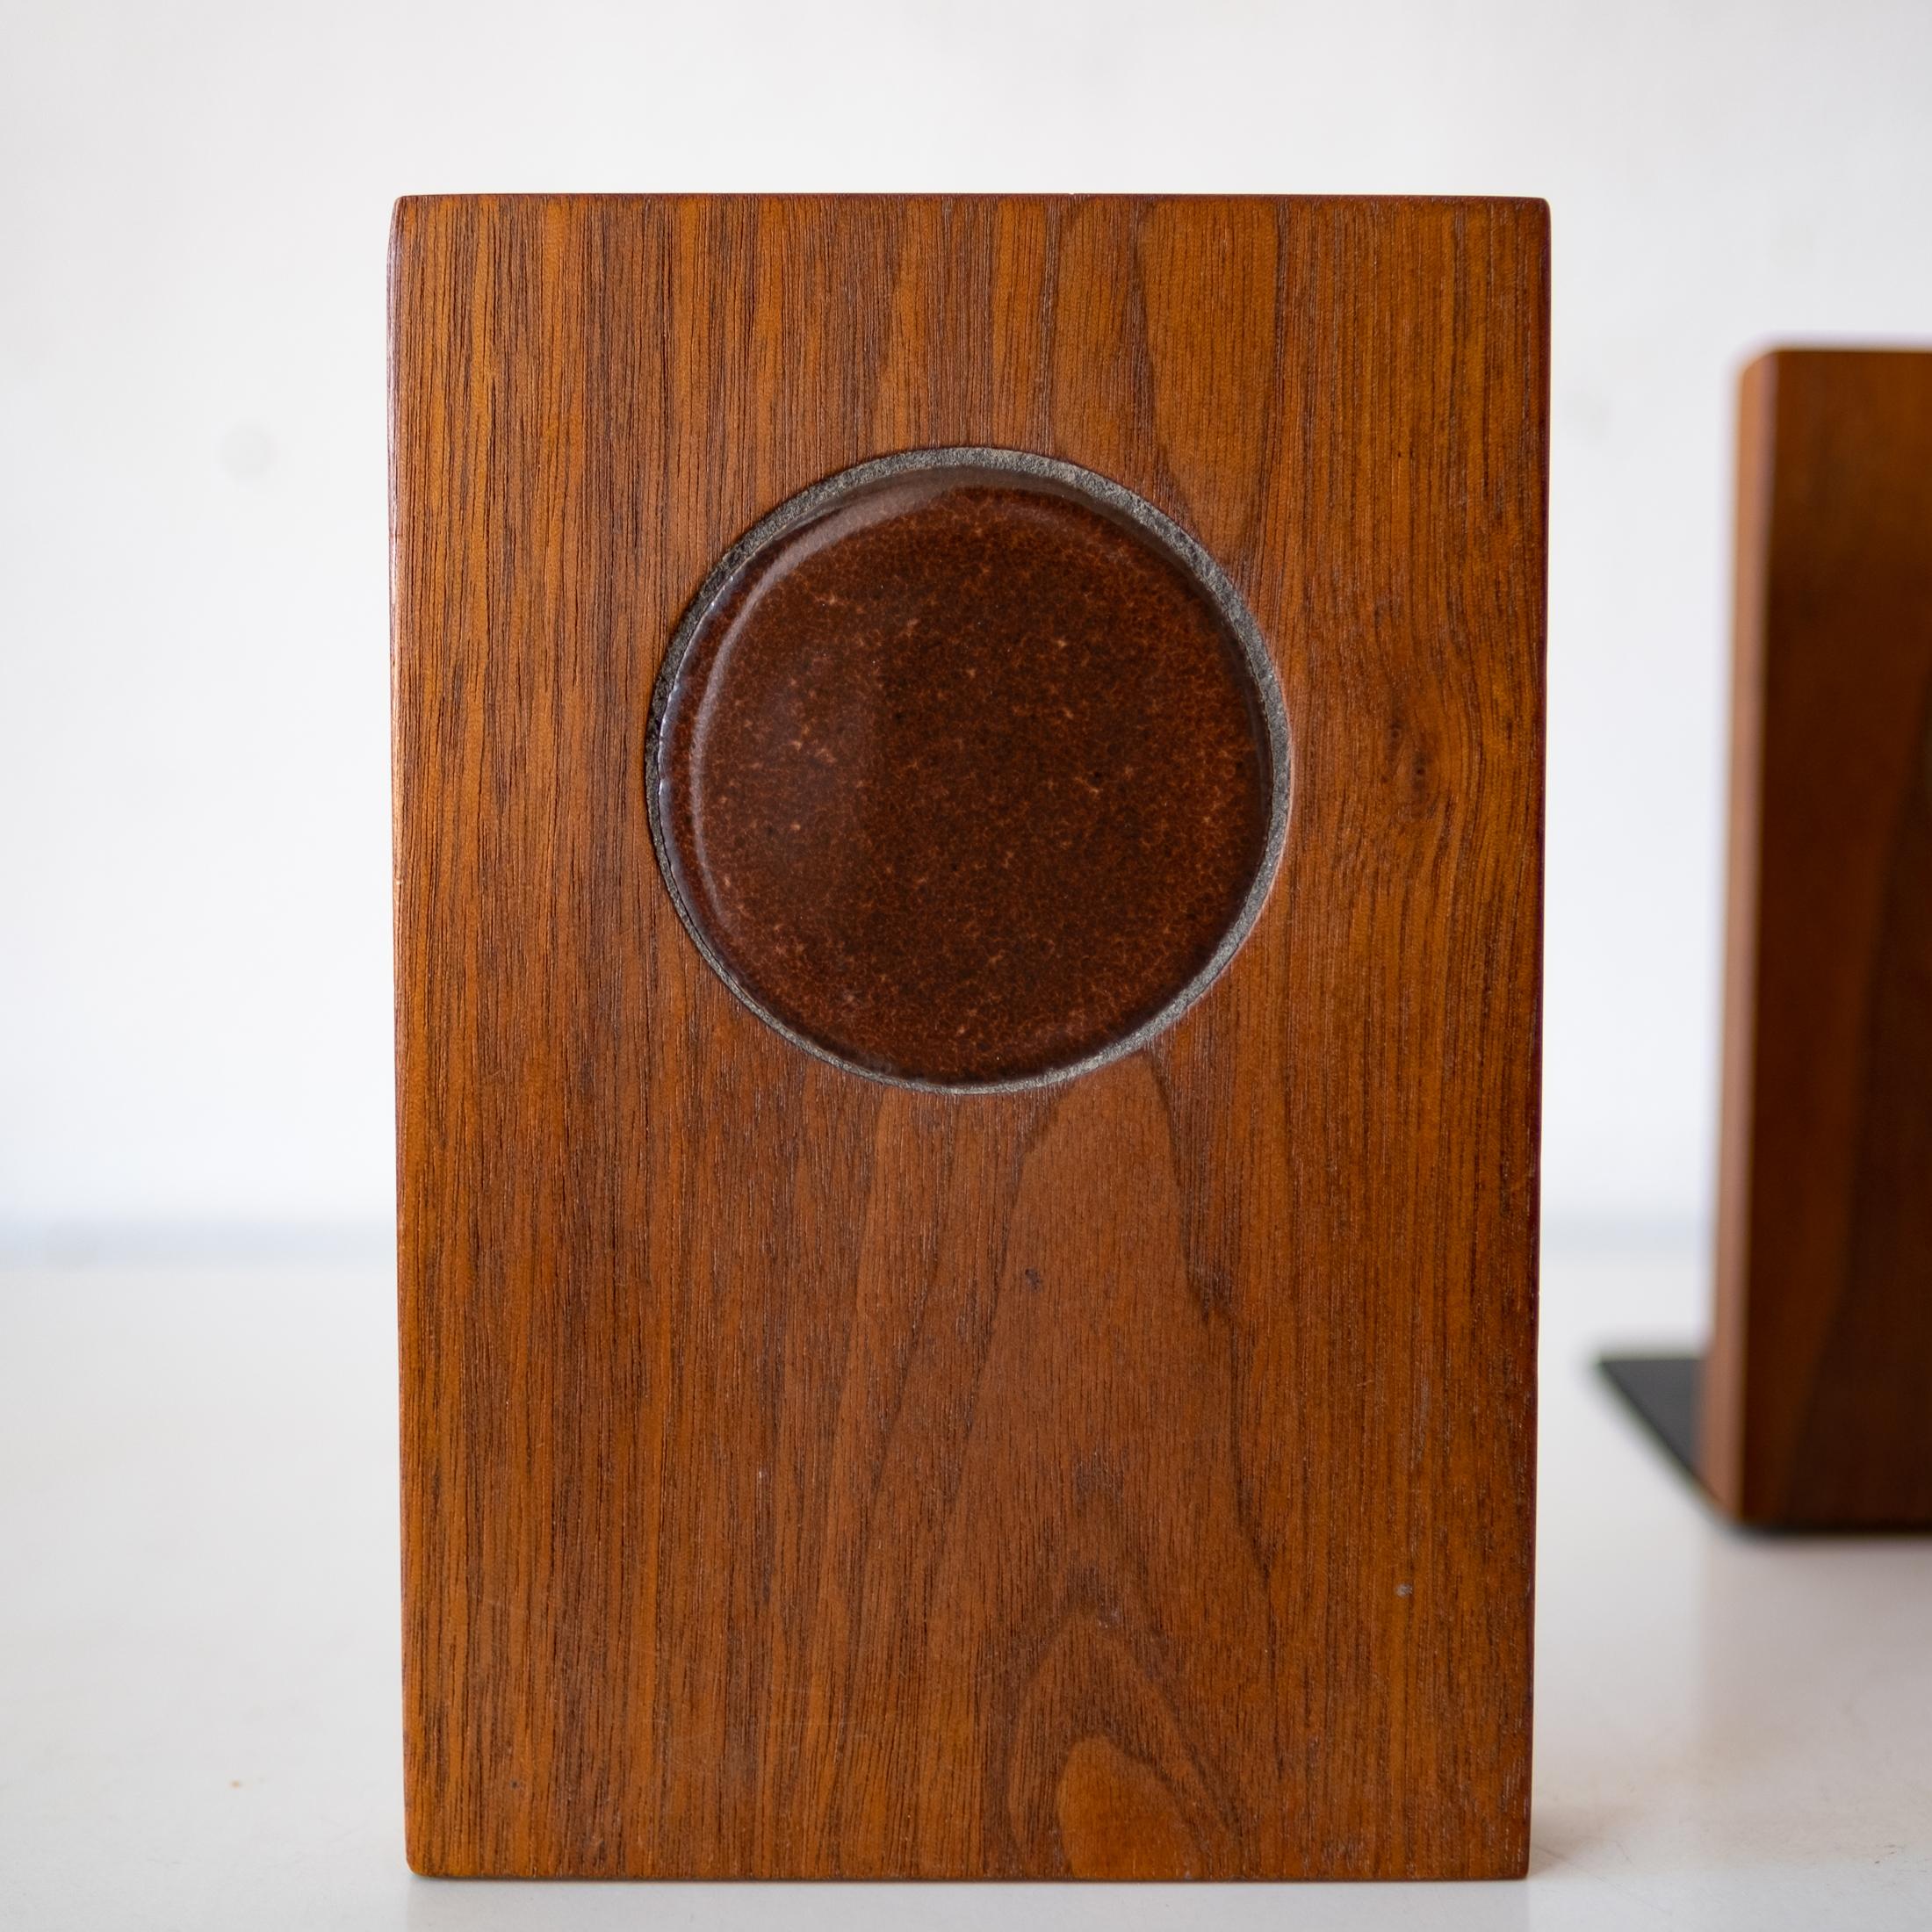 Midcentury Walnut and Ceramic Tile and Bookends 1